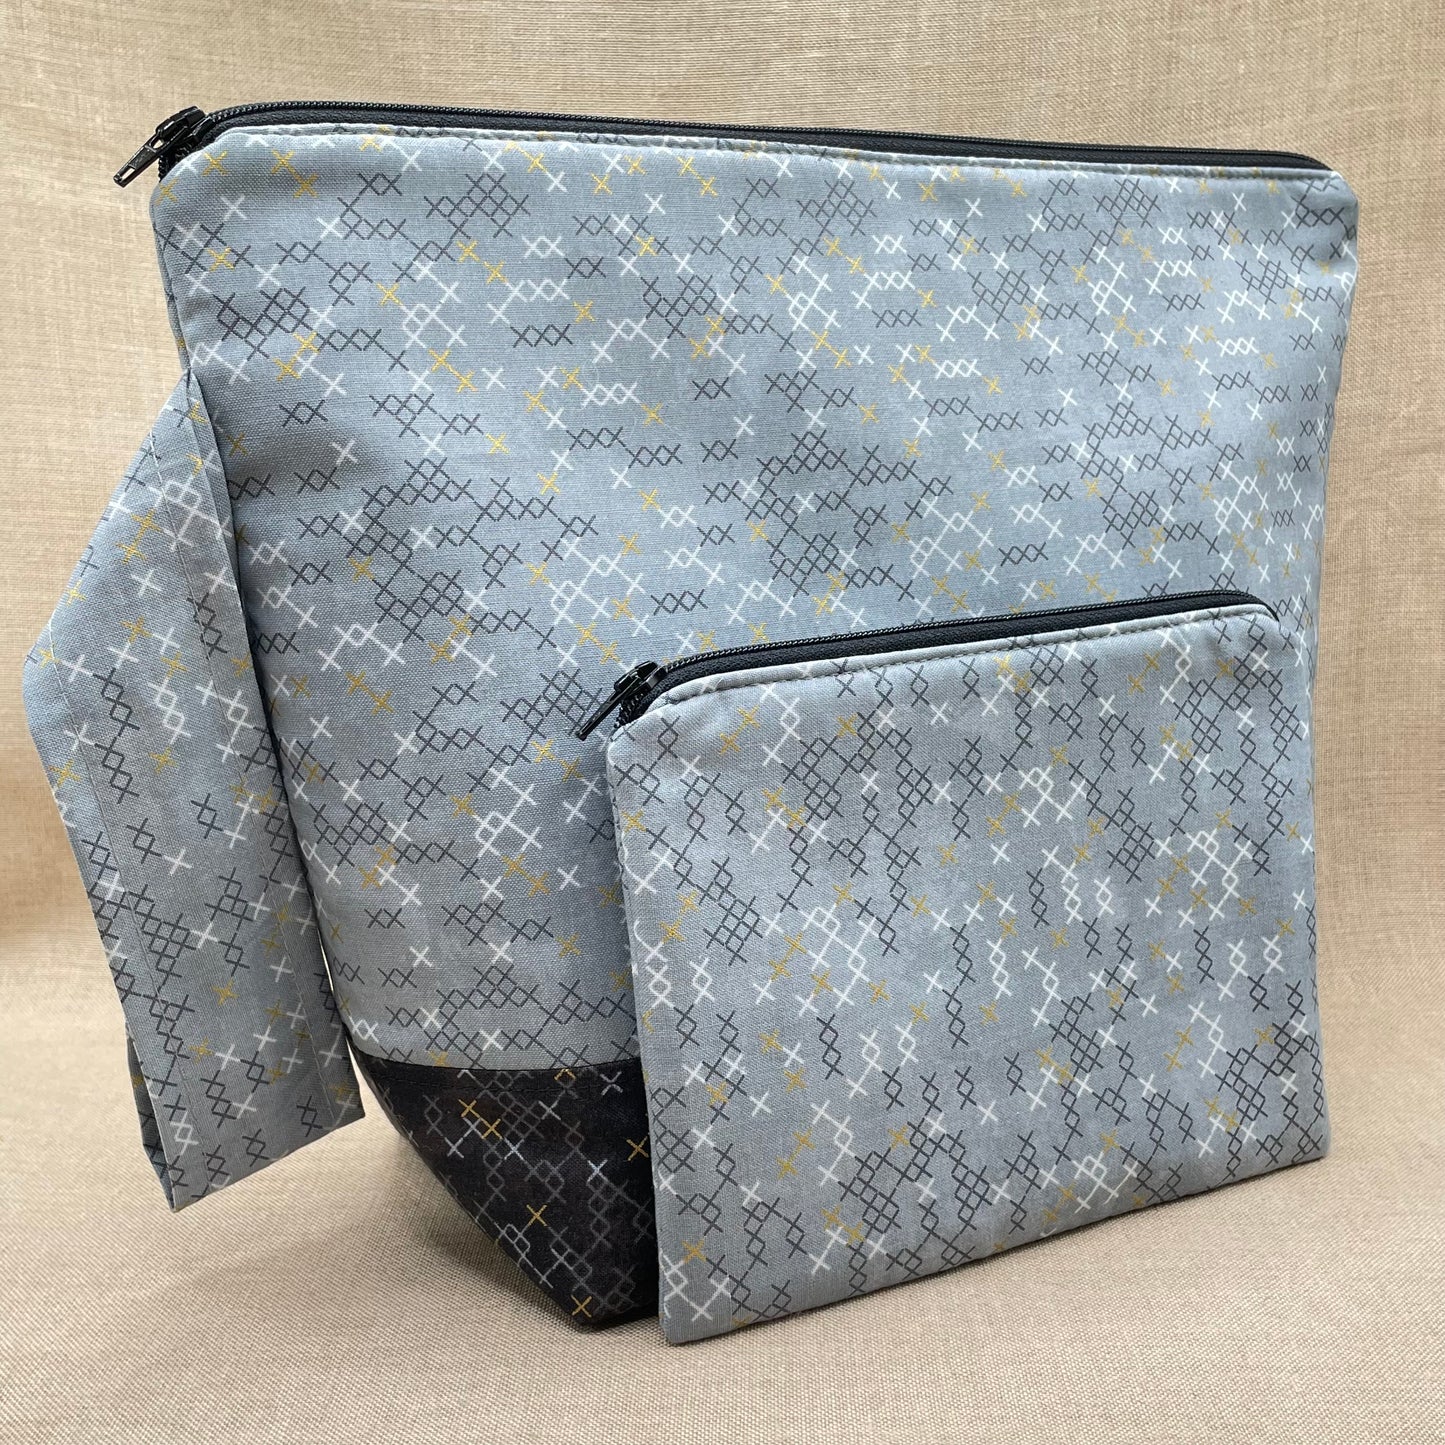 January 2022 Bag of the Month - Project Bag with Coordinating Notions Pouch